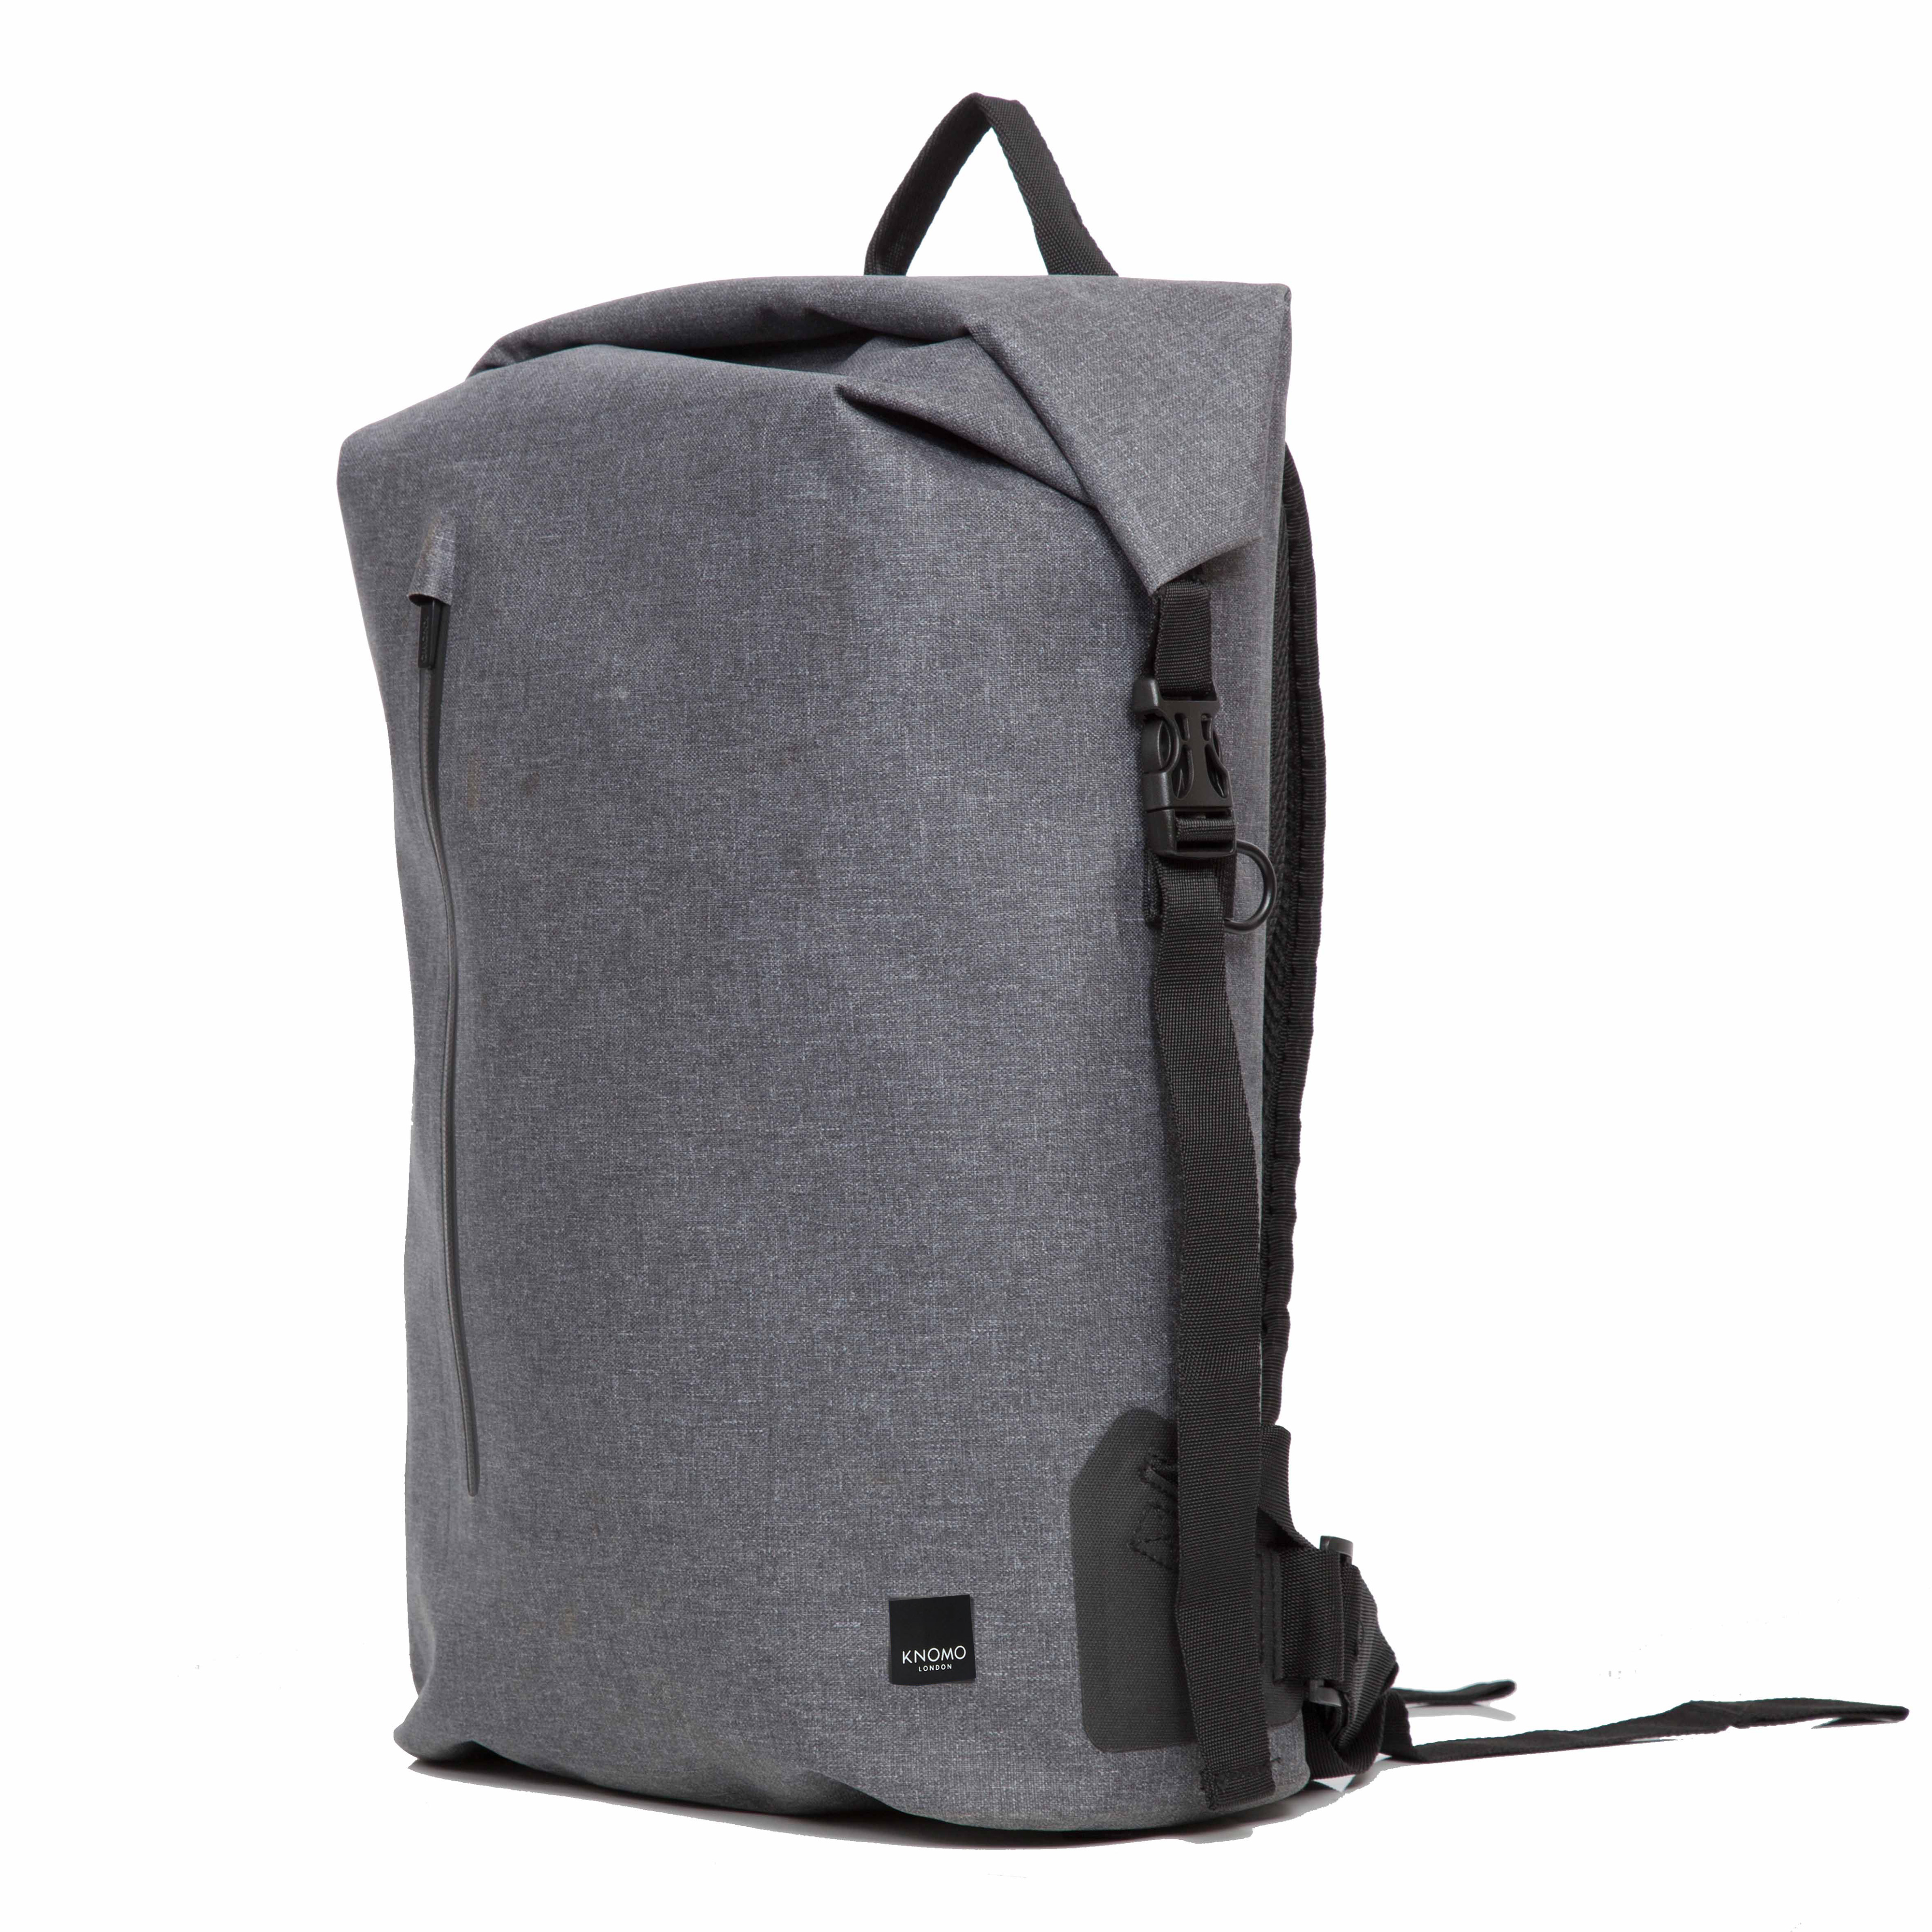 Cromwell Rolltop Backpack